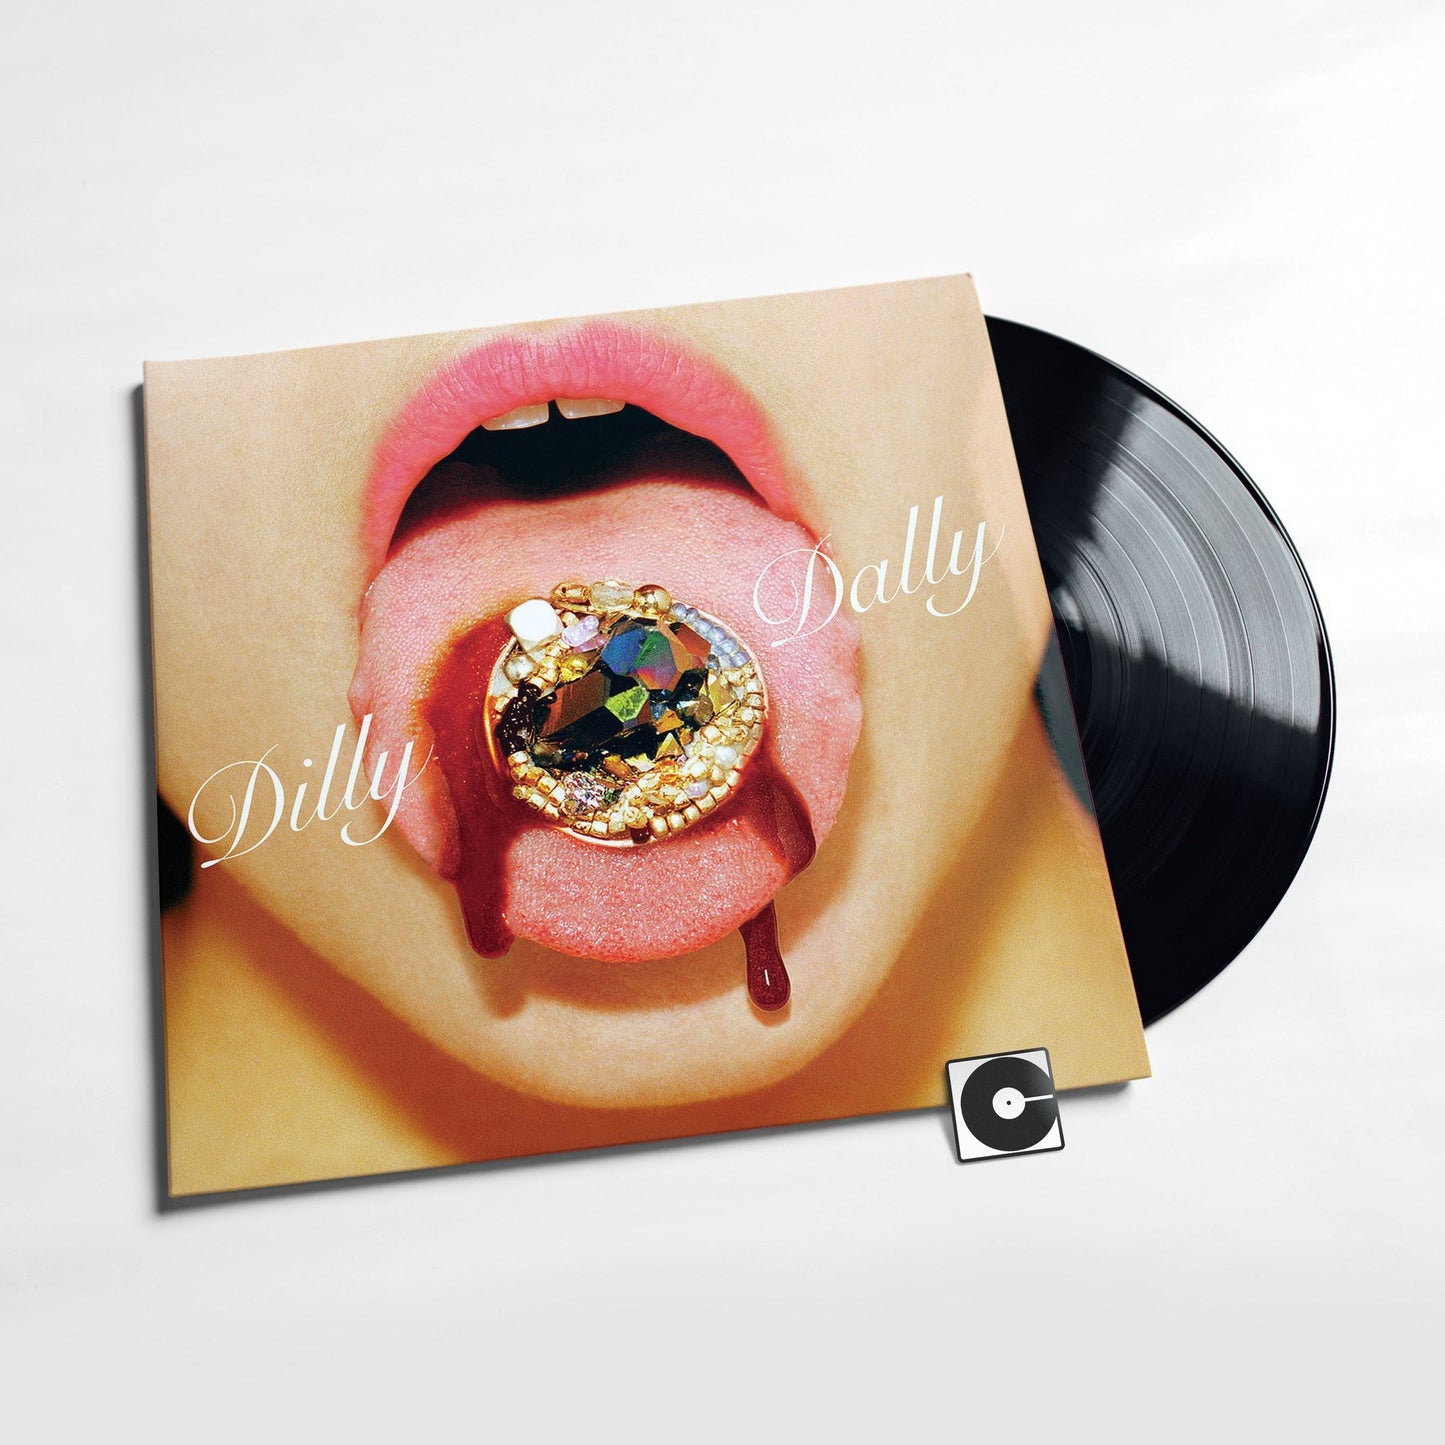 Dilly Dally - "Sore"